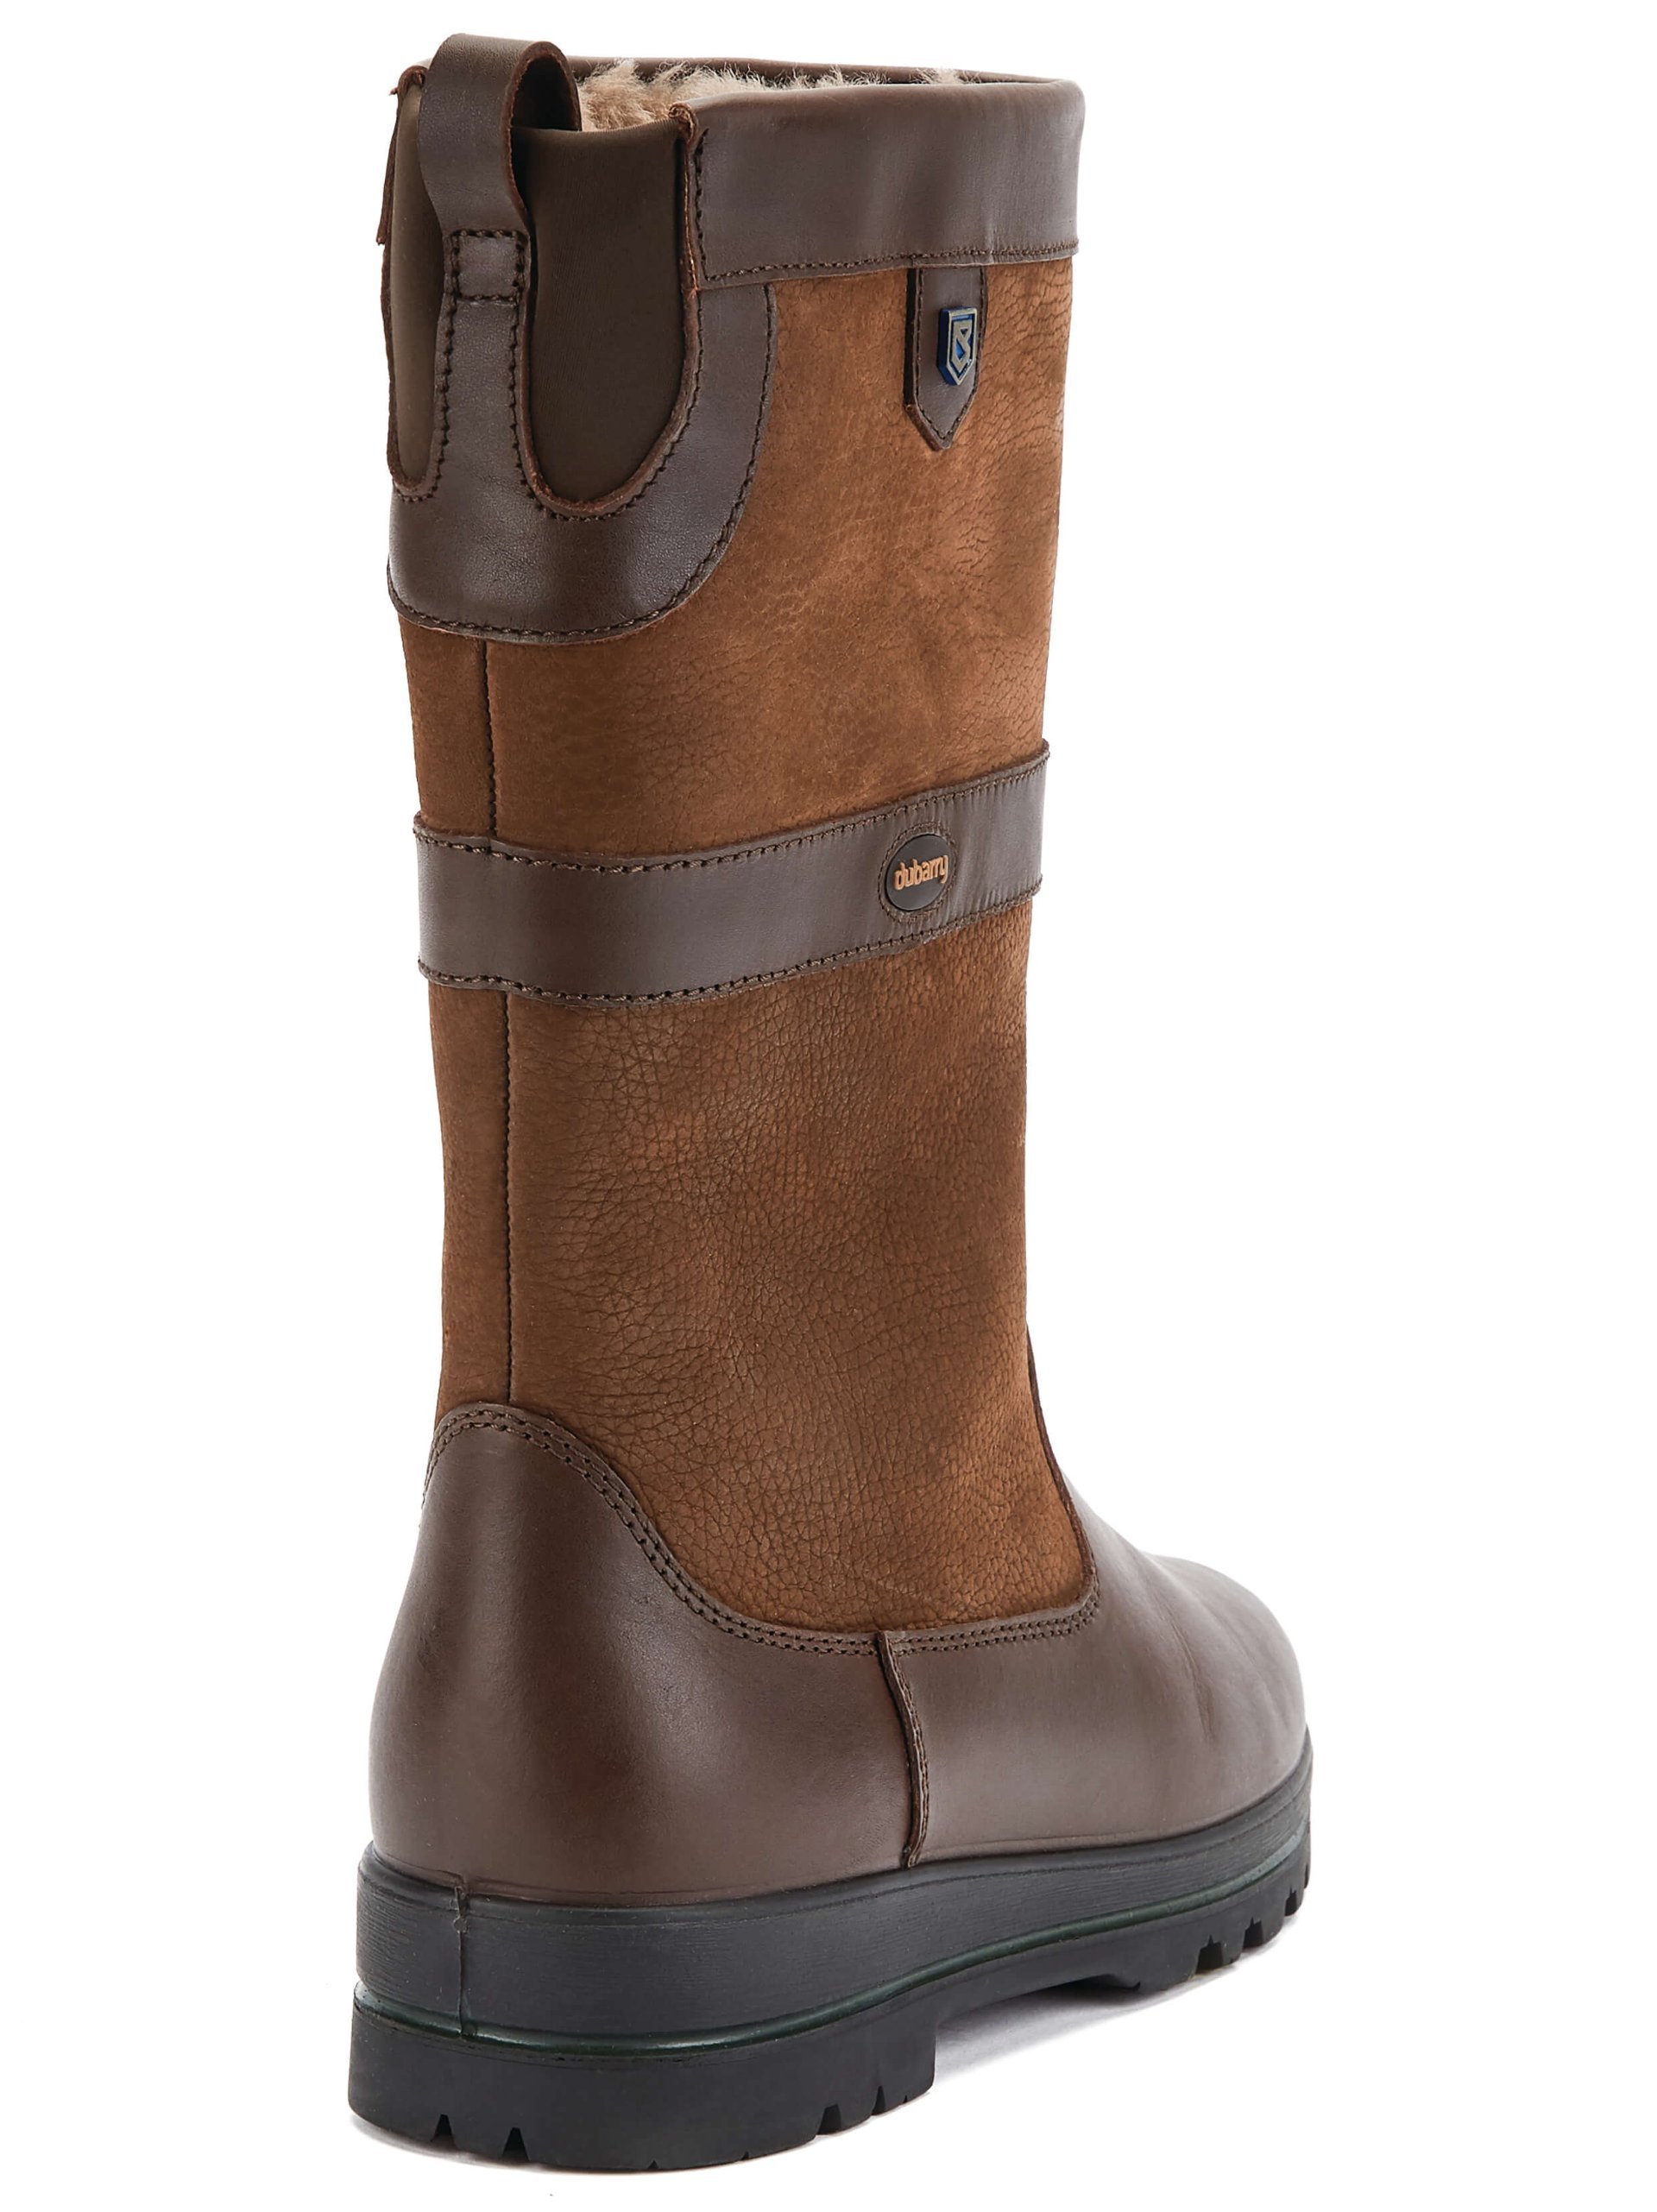 Dubarry Donegal - Stiefel